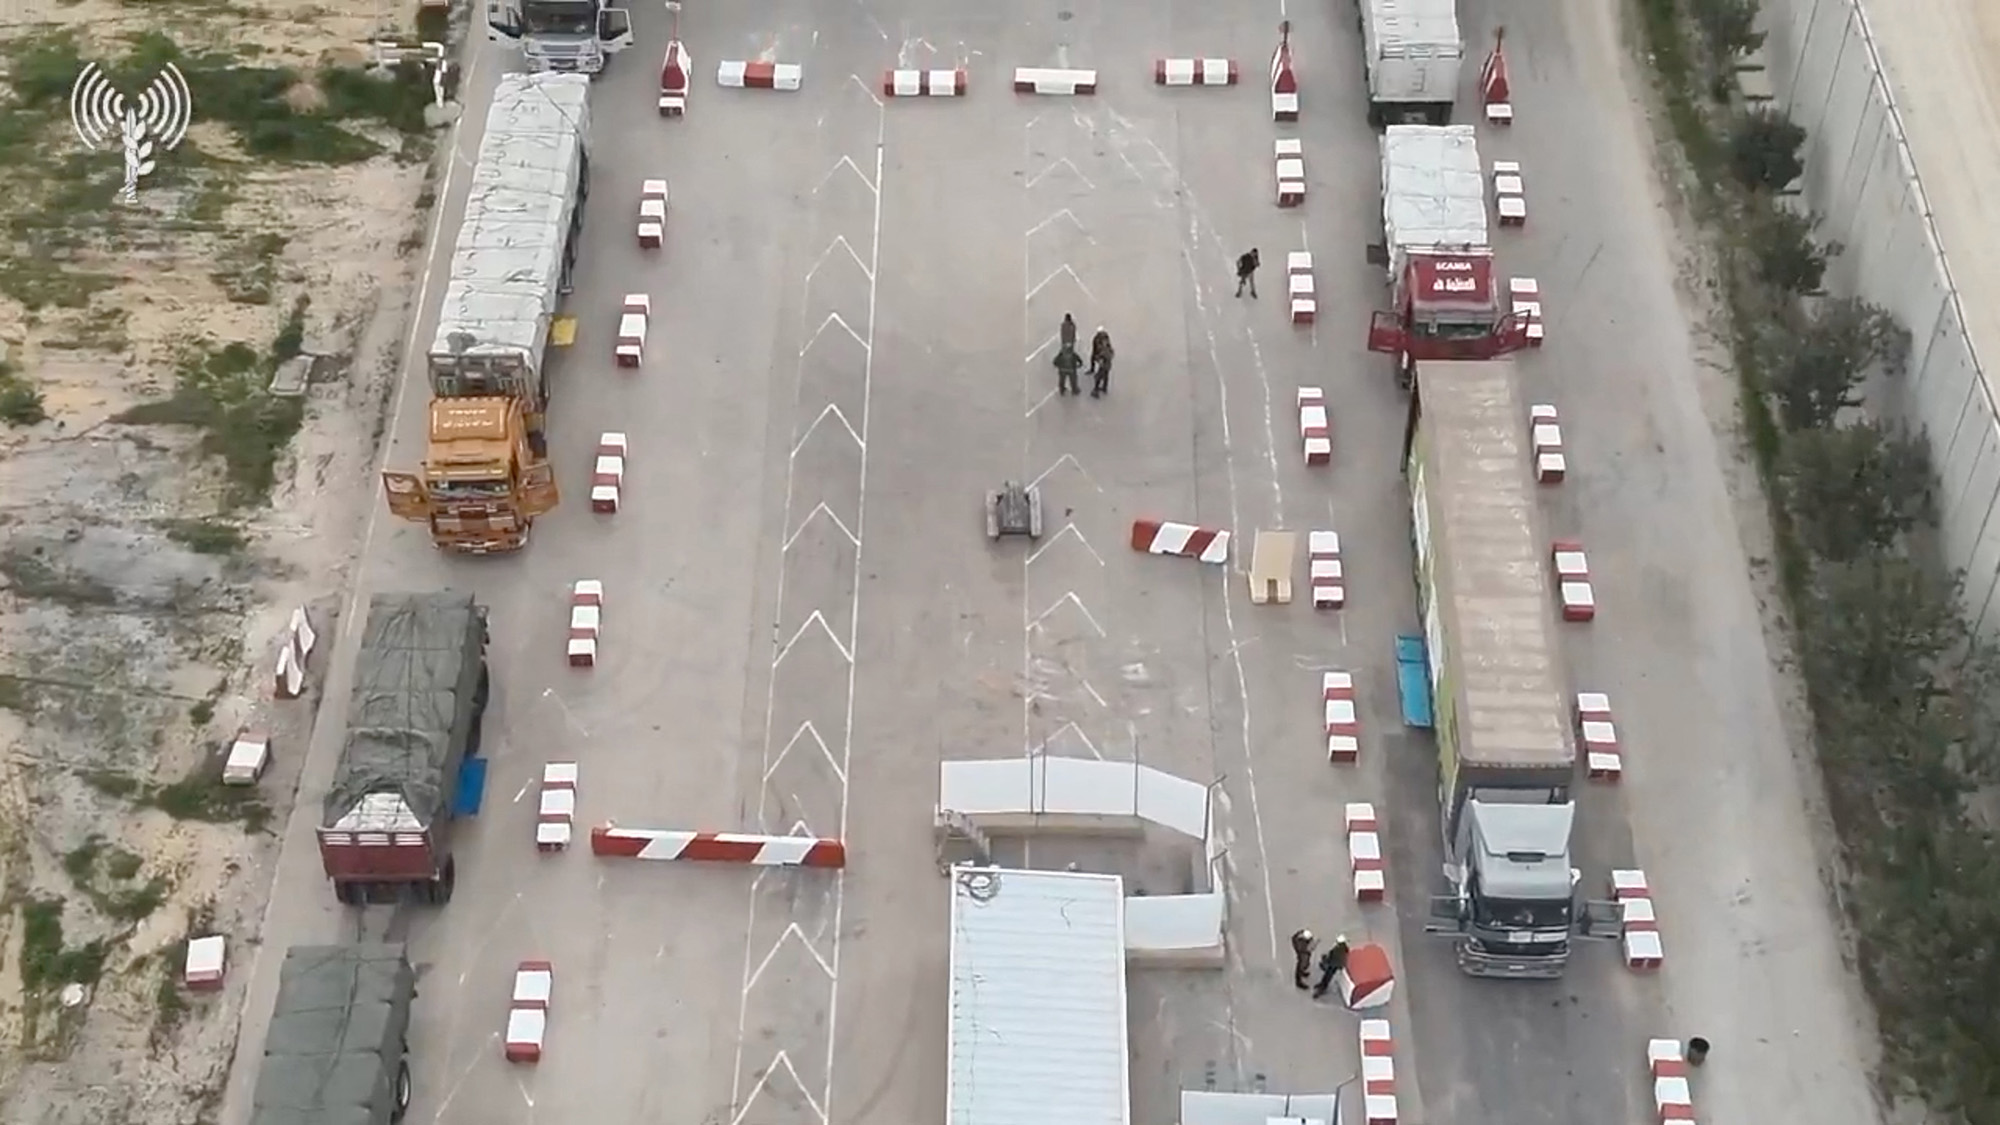 Humanitarian aid trucks wait in line to be inspected at the Kerem Shalom crossing on the border between Israel, Gaza and Egypt in this still image taken from video released on December 12.